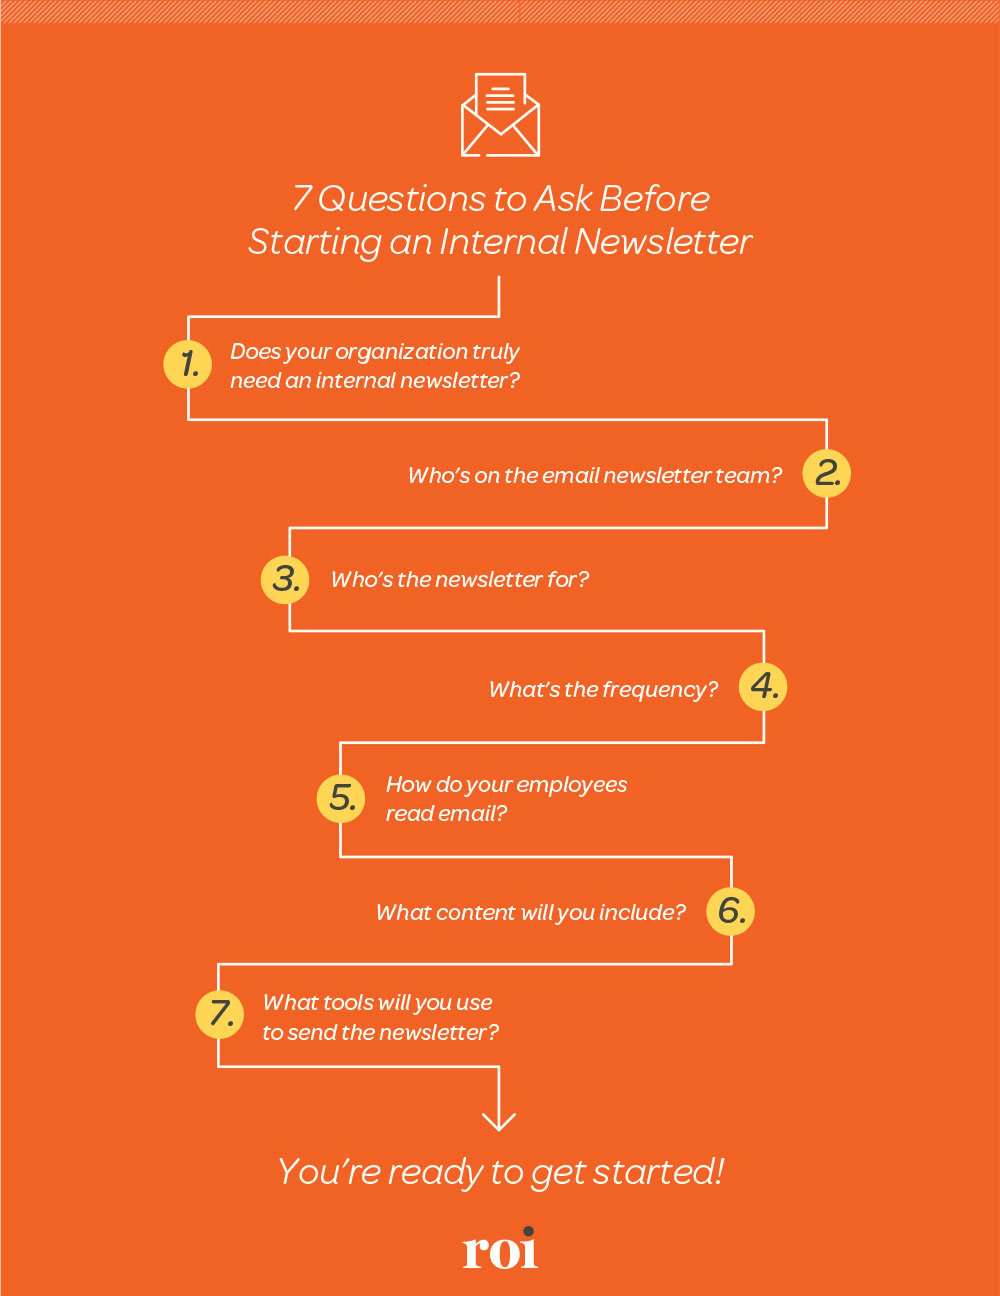 7 Questions to Ask Before Starting an Internal Newsletter.